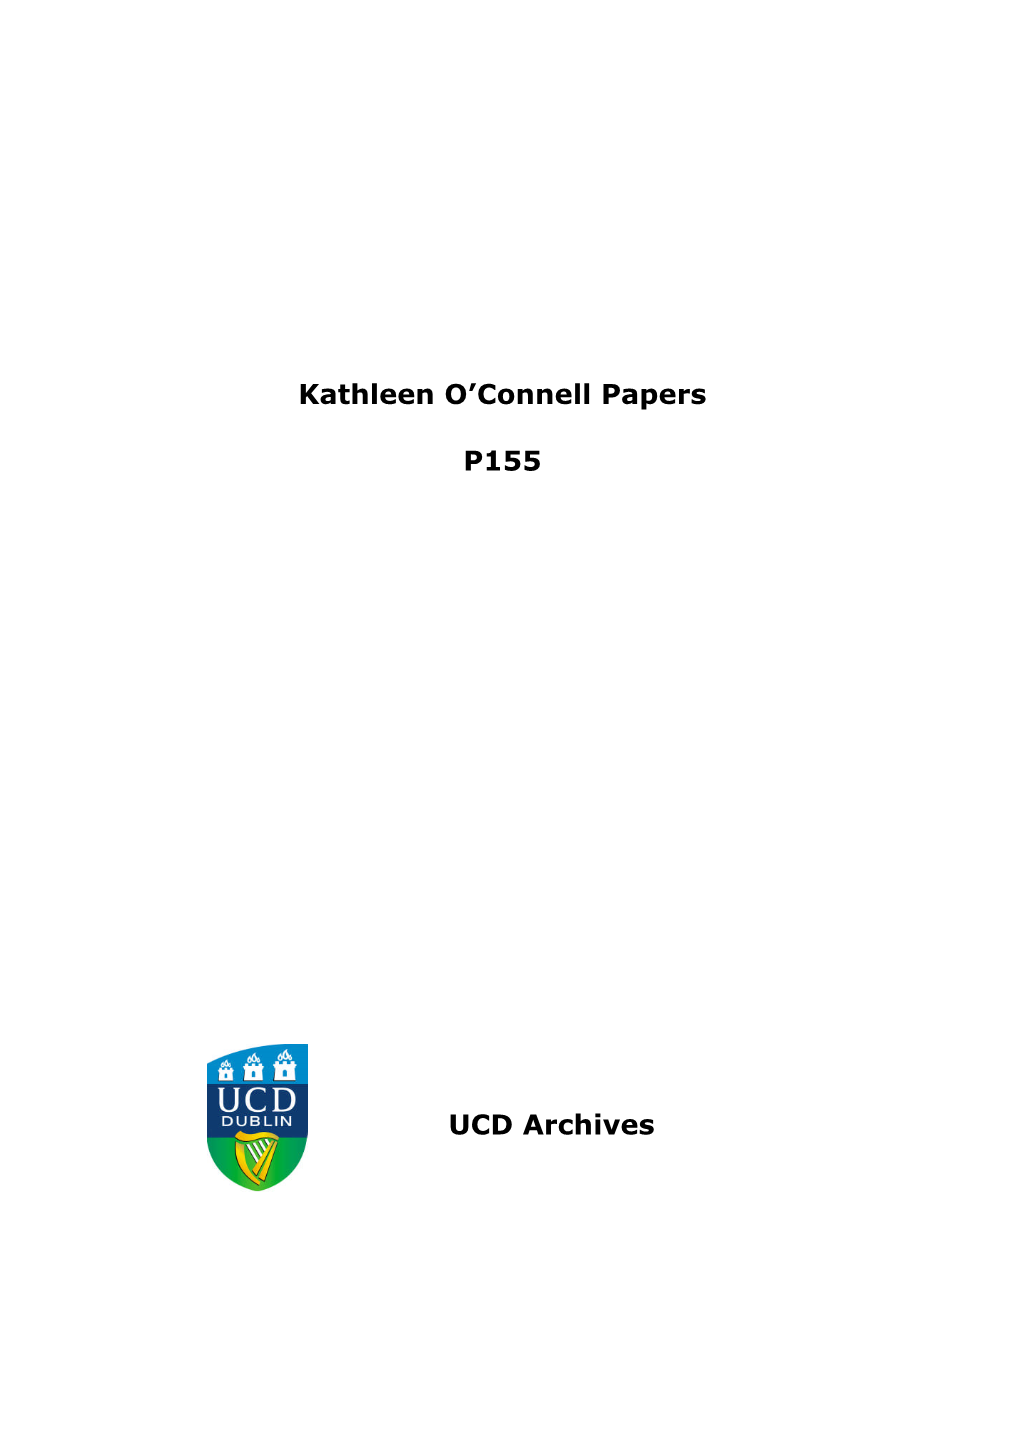 Kathleen O'connell Papers P155 UCD Archives